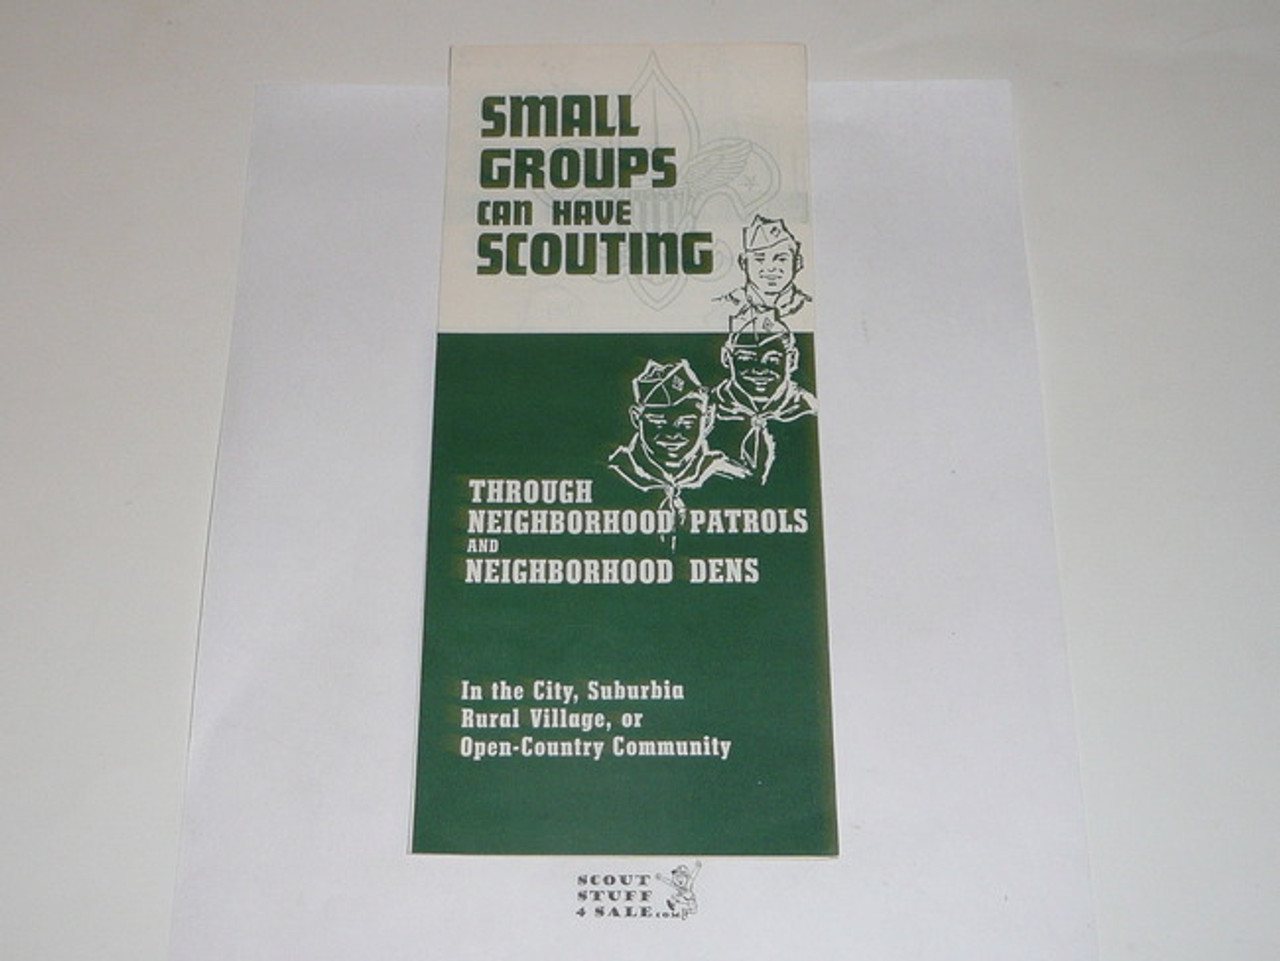 1962 Small Groups Can Have Scouting, Boy Scout Promotional Brochure, 12-62 printing